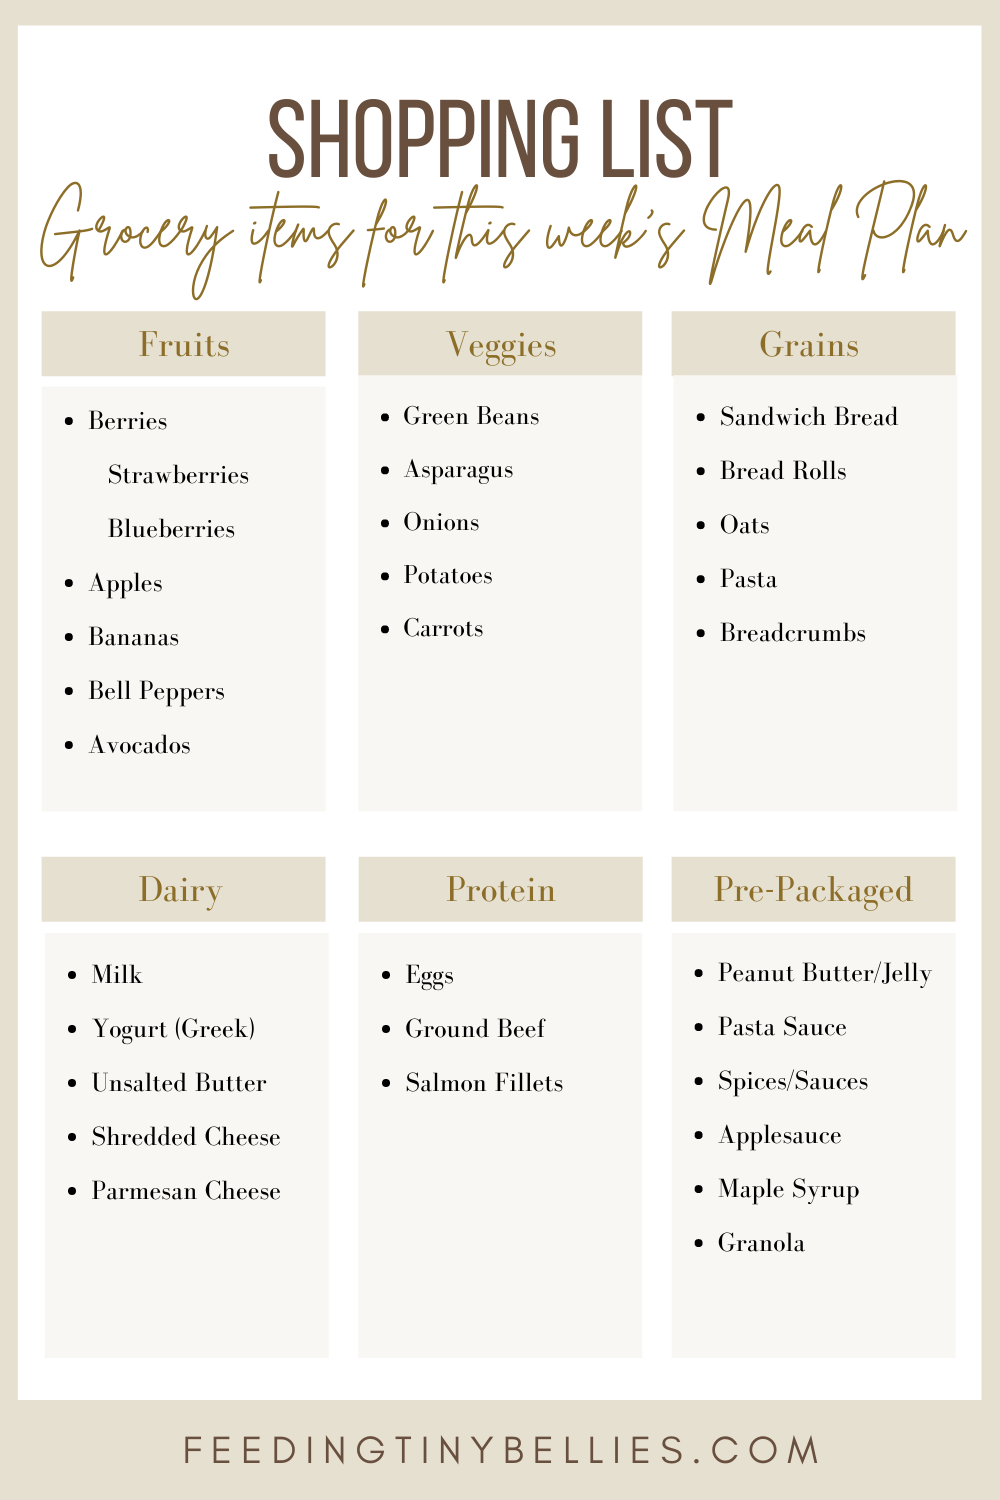 Baby led weaning meal plan grocery list